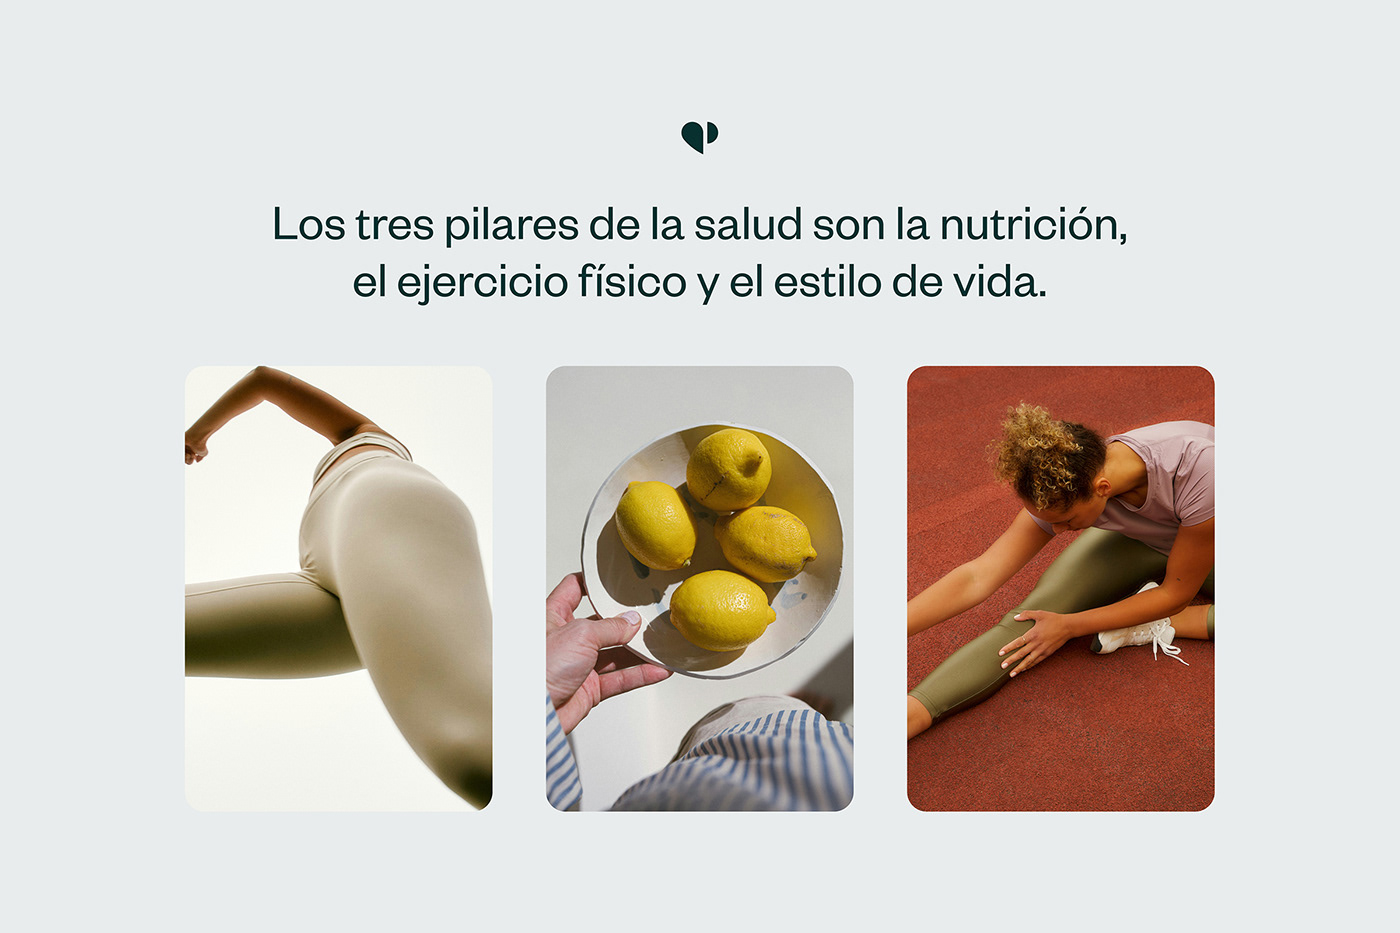 coaching Health medical Wellness fitness nutrition academy heart lifestyle vidapotencial